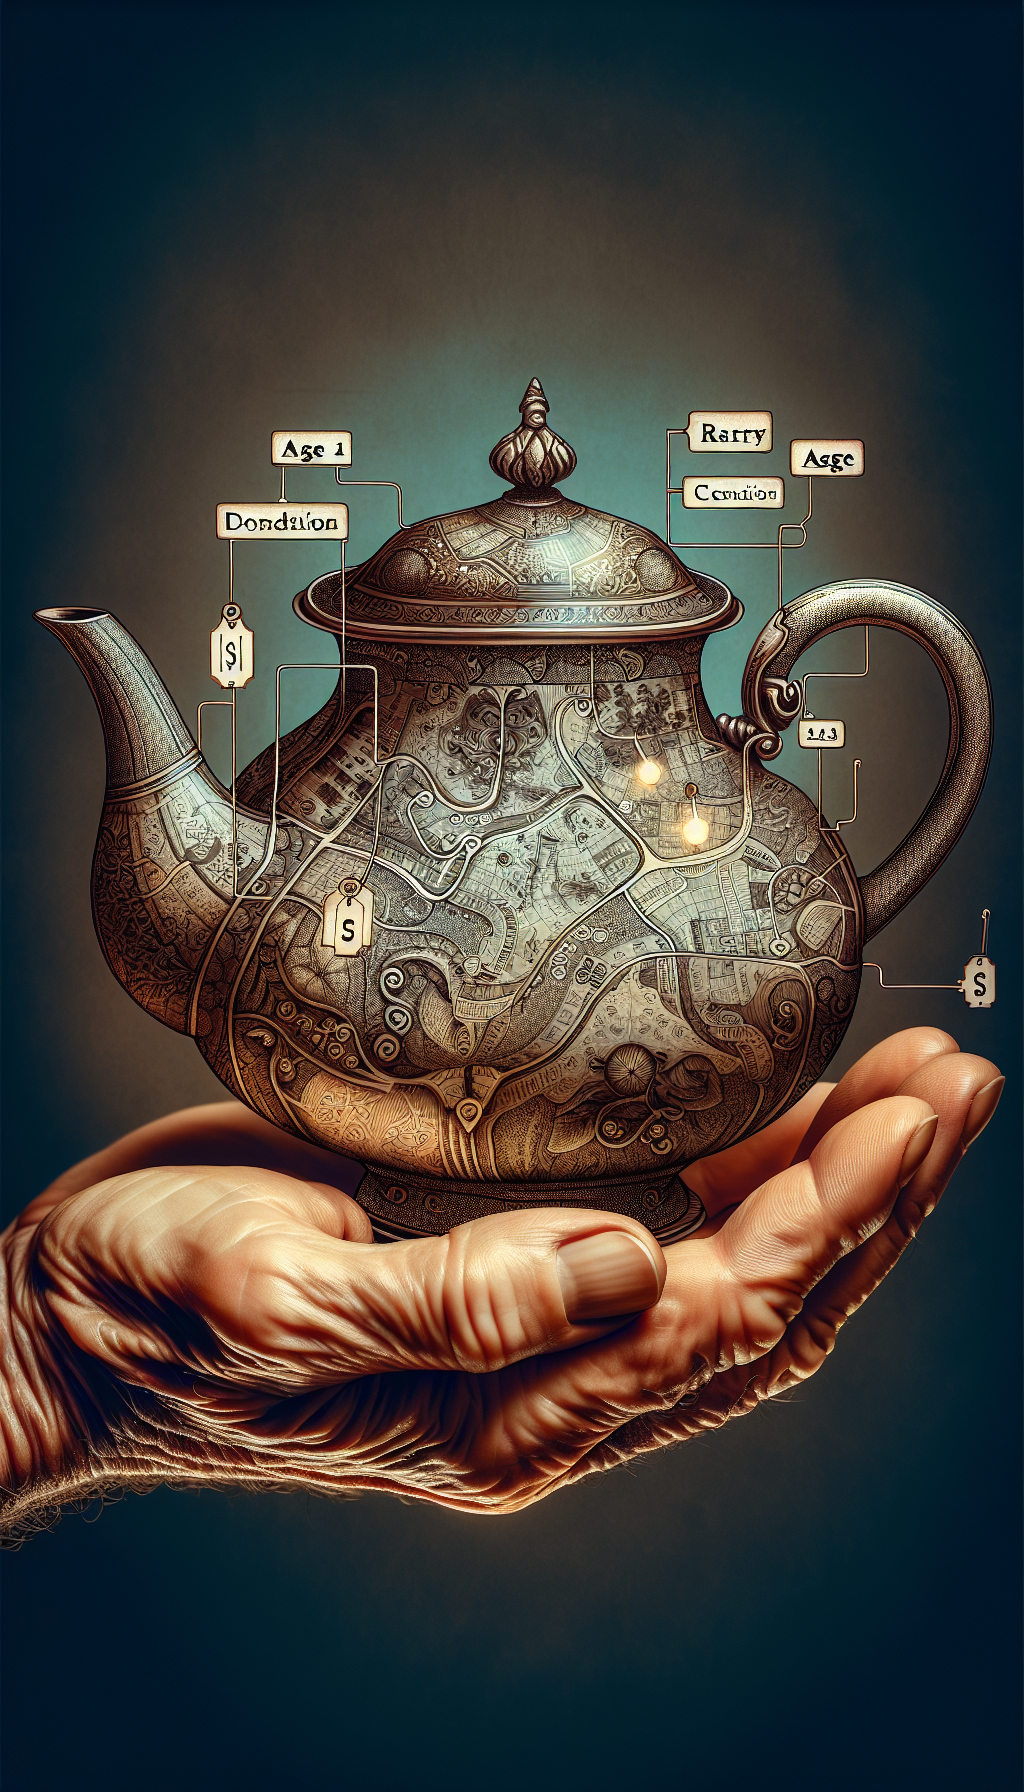 An elegantly aged hand is gently cradling an ornate antique teapot, which seamlessly transitions into a treasure map, with key value-influencing factors such as rarity, age, and condition marked as destinations. Intricate patterns and a shimmering price tag intertwined with the handle suggest the teapot's allure and worth, capturing the essence of the post in a visual metaphor.